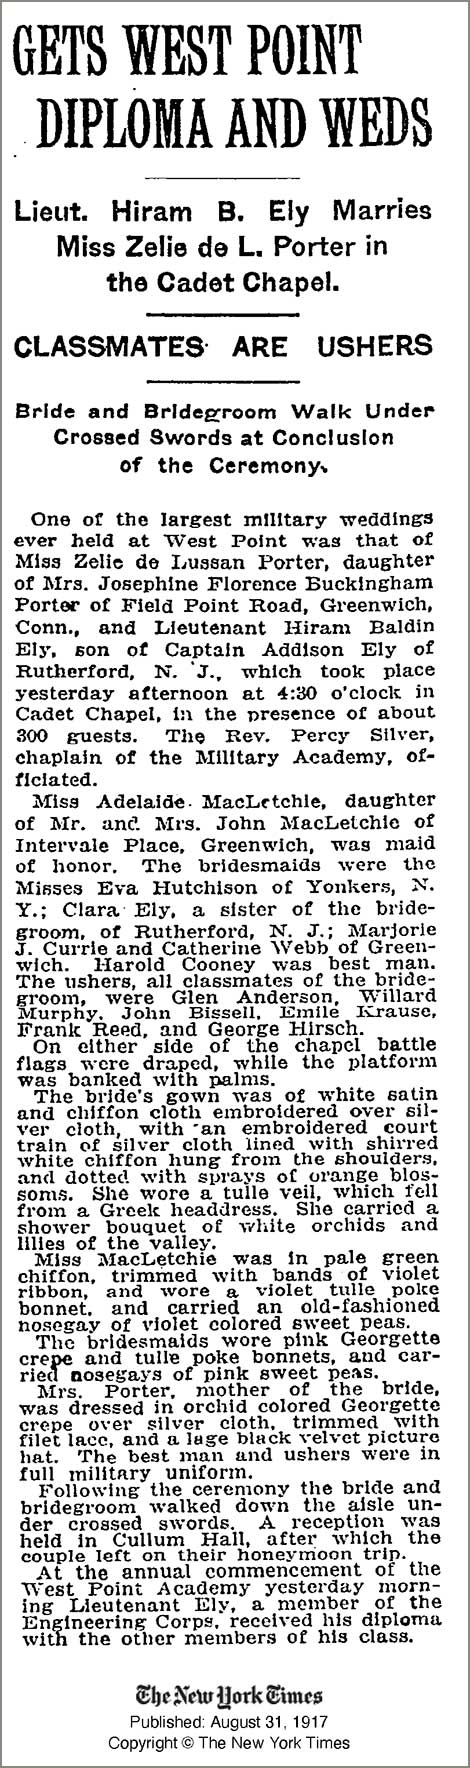 Image of newspaper article which reads in part: Gets West Point Diploma and Weds. Lieut. Hiram B. Ely Marries Miss Zelie de L. Porter in the Cadet Chapel. Classmates are Ushers. Bride and Bridegroom walk under crossed swords at conclusion of the ceremony. One of the largest military weddings ever held at West Point was that of Miss Zelie de Lussan Porter, daughter of Mrs. Josephine Florence Buckingham Porter of Field Road, Greenwich, Conn., and Lieutenant Hiram Baldwin Ely, son of Captain Addison Ely of Rutherford, N. J., which took place yesterday afternoon at 4:30 o'clock in Cadet Chapel, in the presence of about 300 guests....